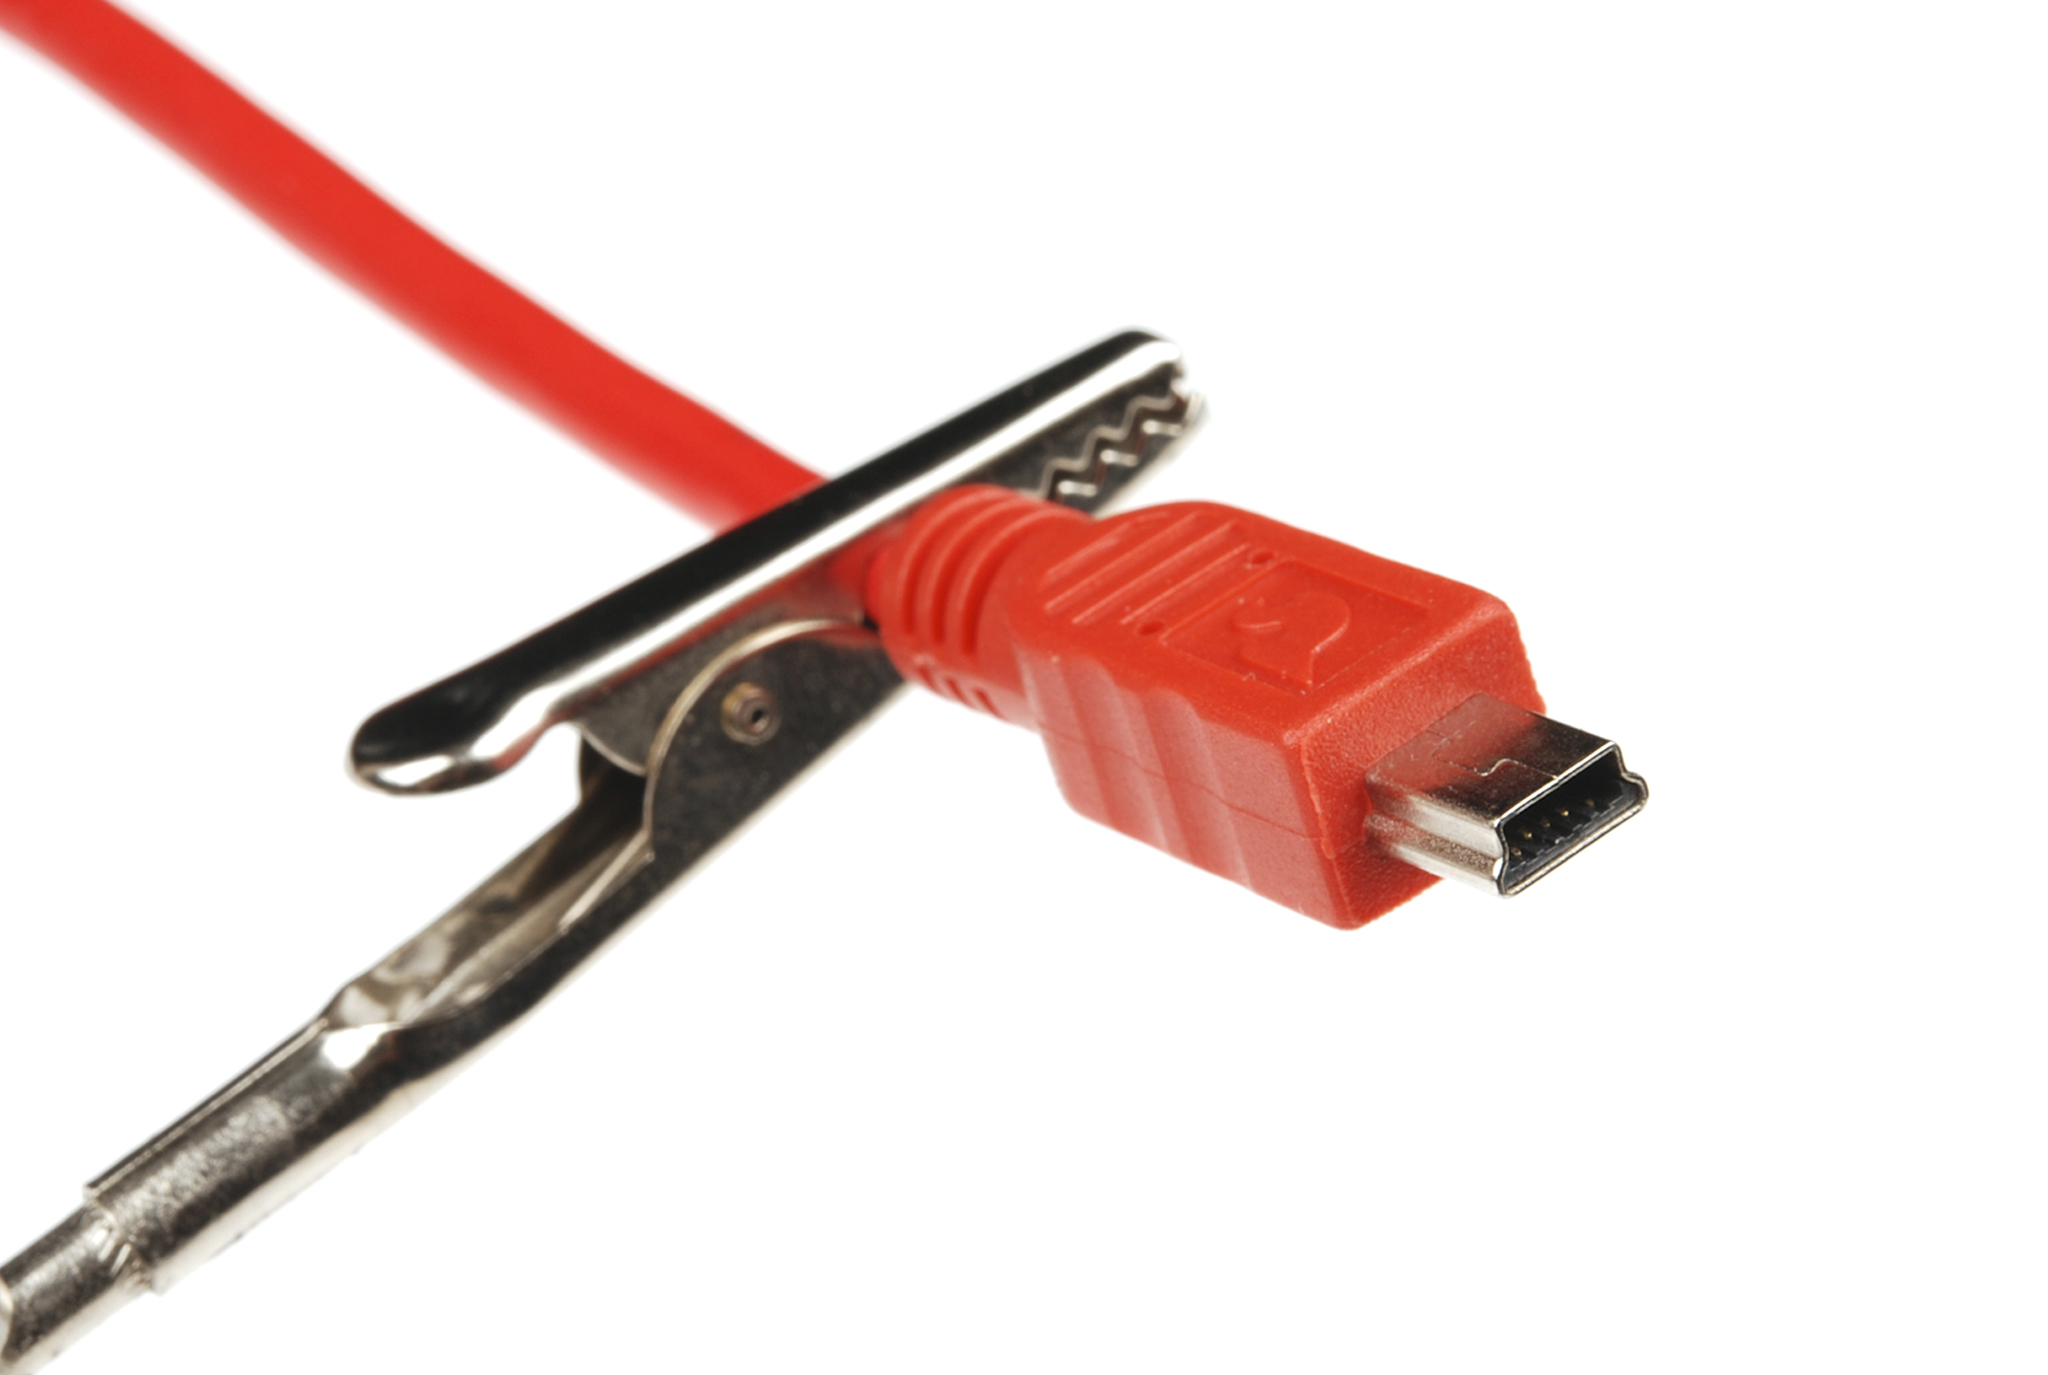 Cable Length: Other Cables Occus for Original motherboards Such as for Samsung USB Female Socket Connector Tongue on The Long Body